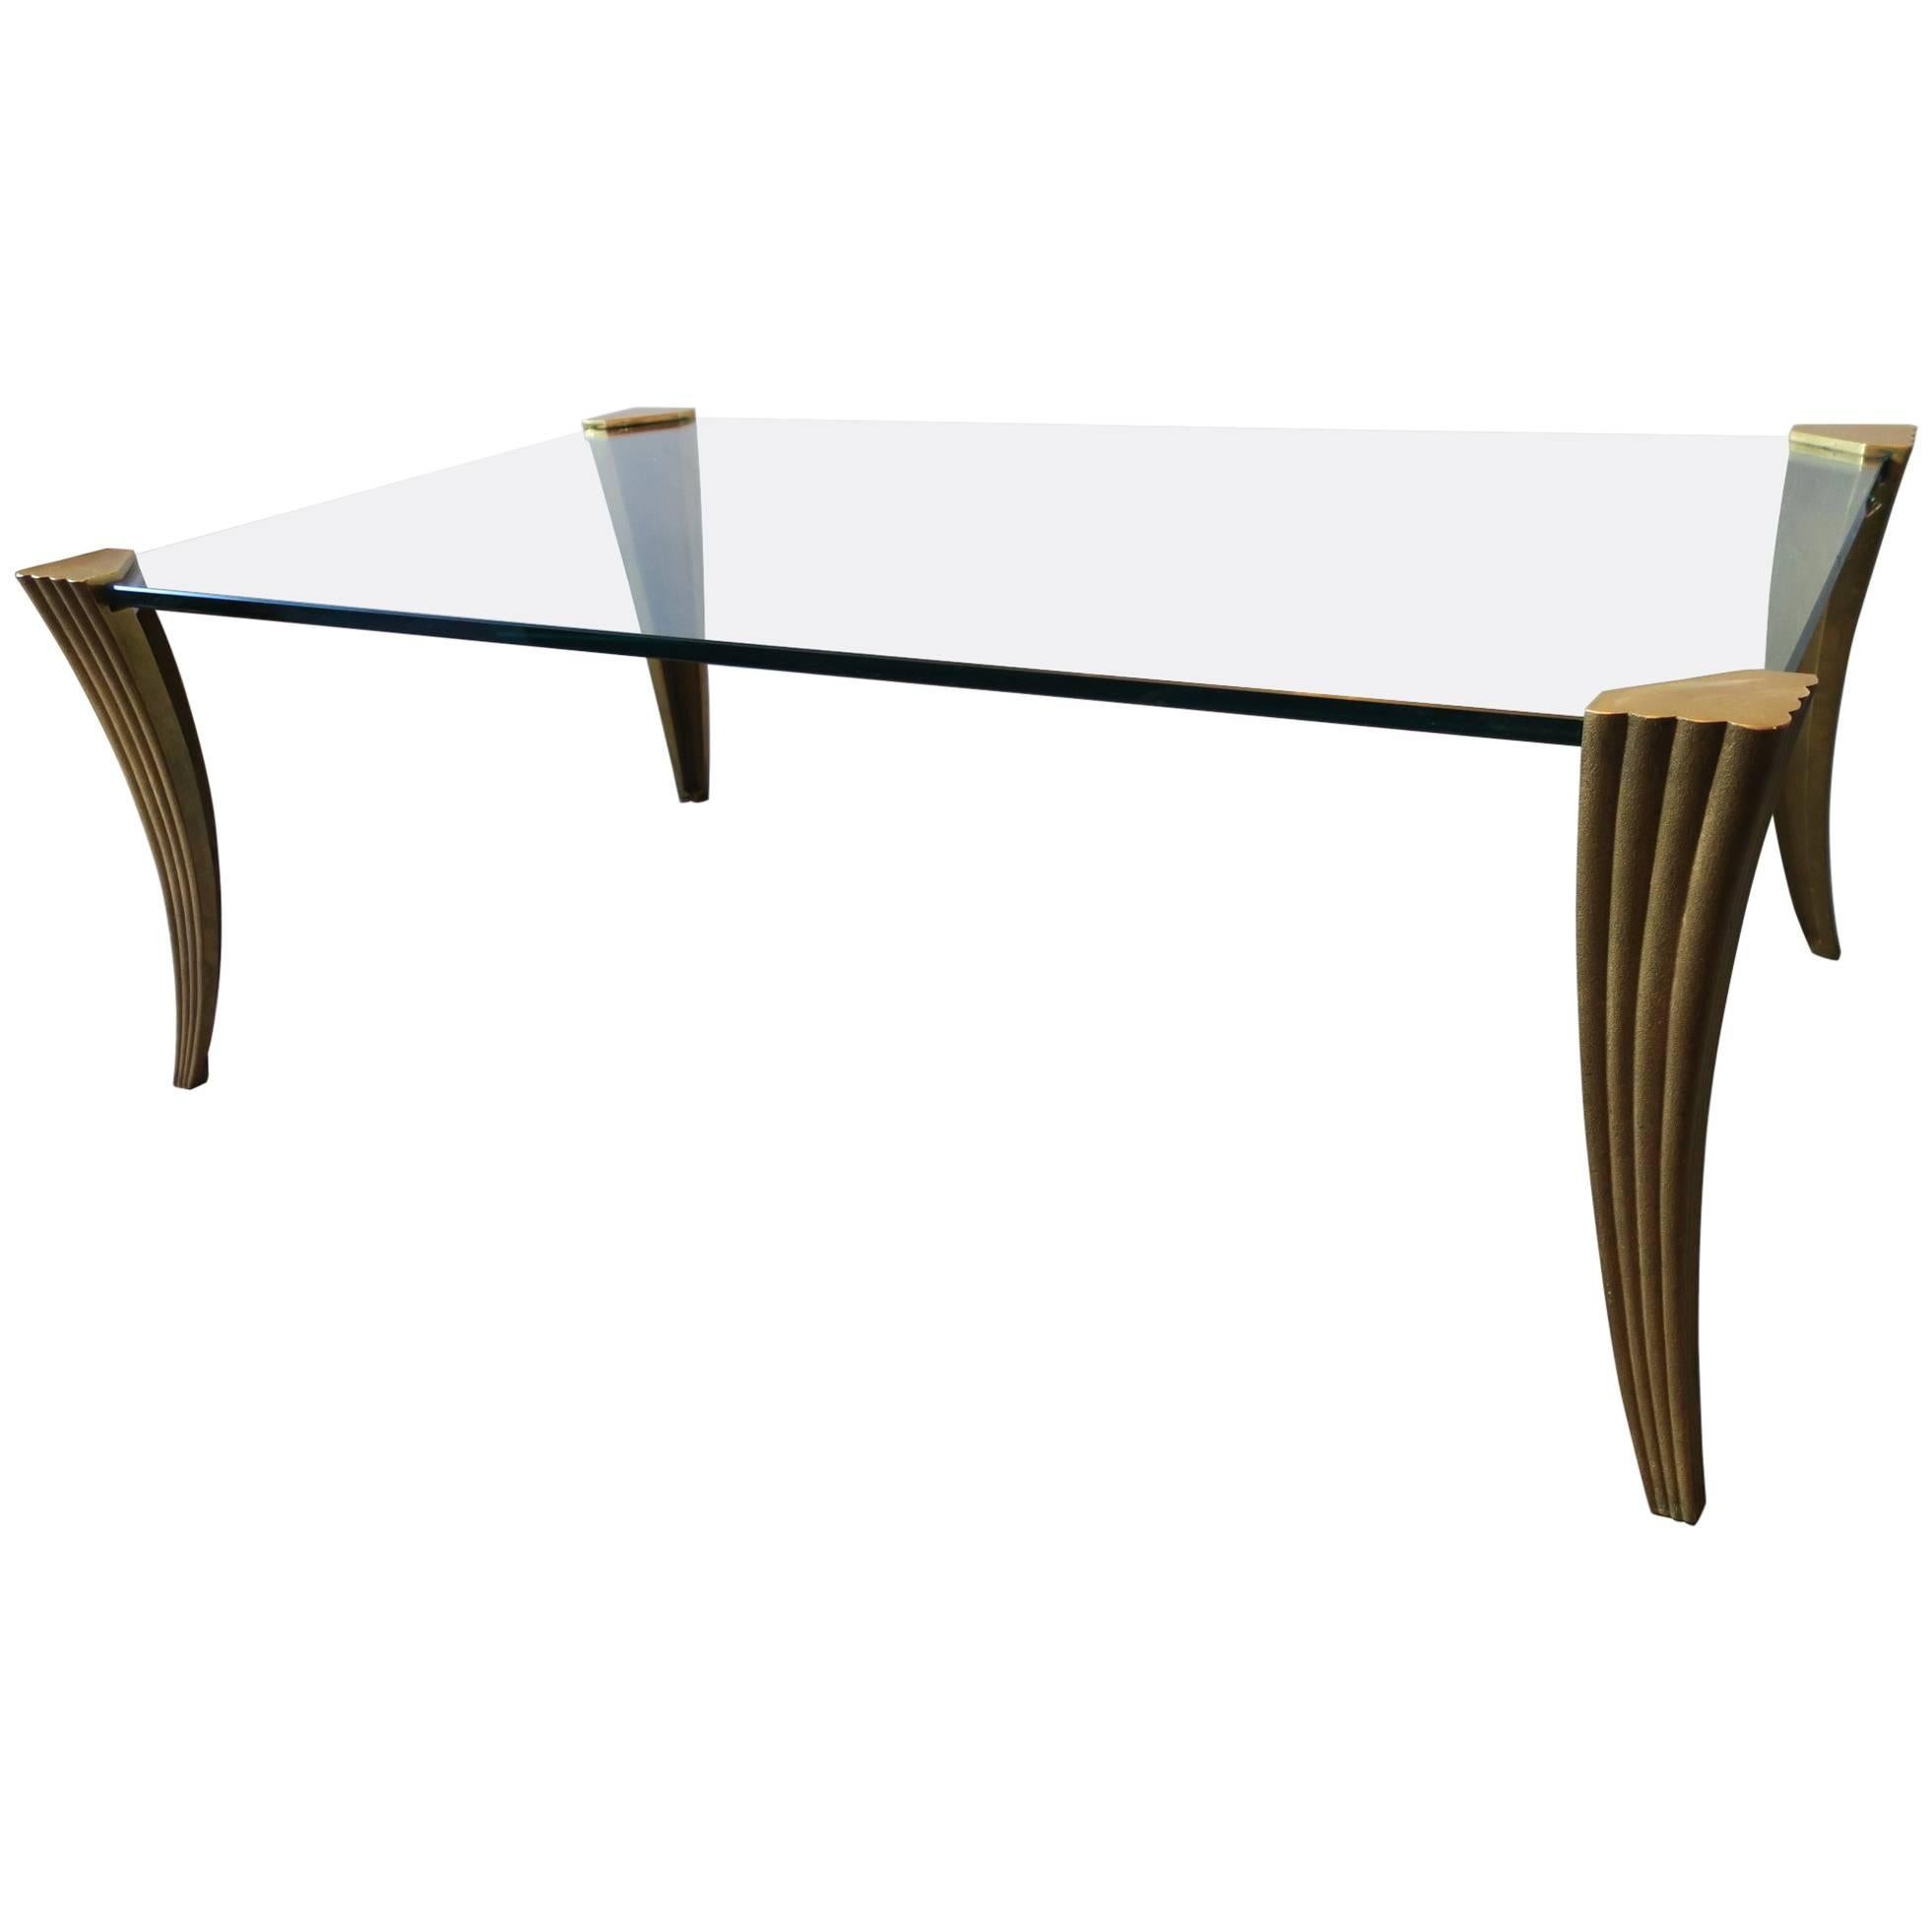 Fine Midcentury Brass and Glass Coffee Table For Sale